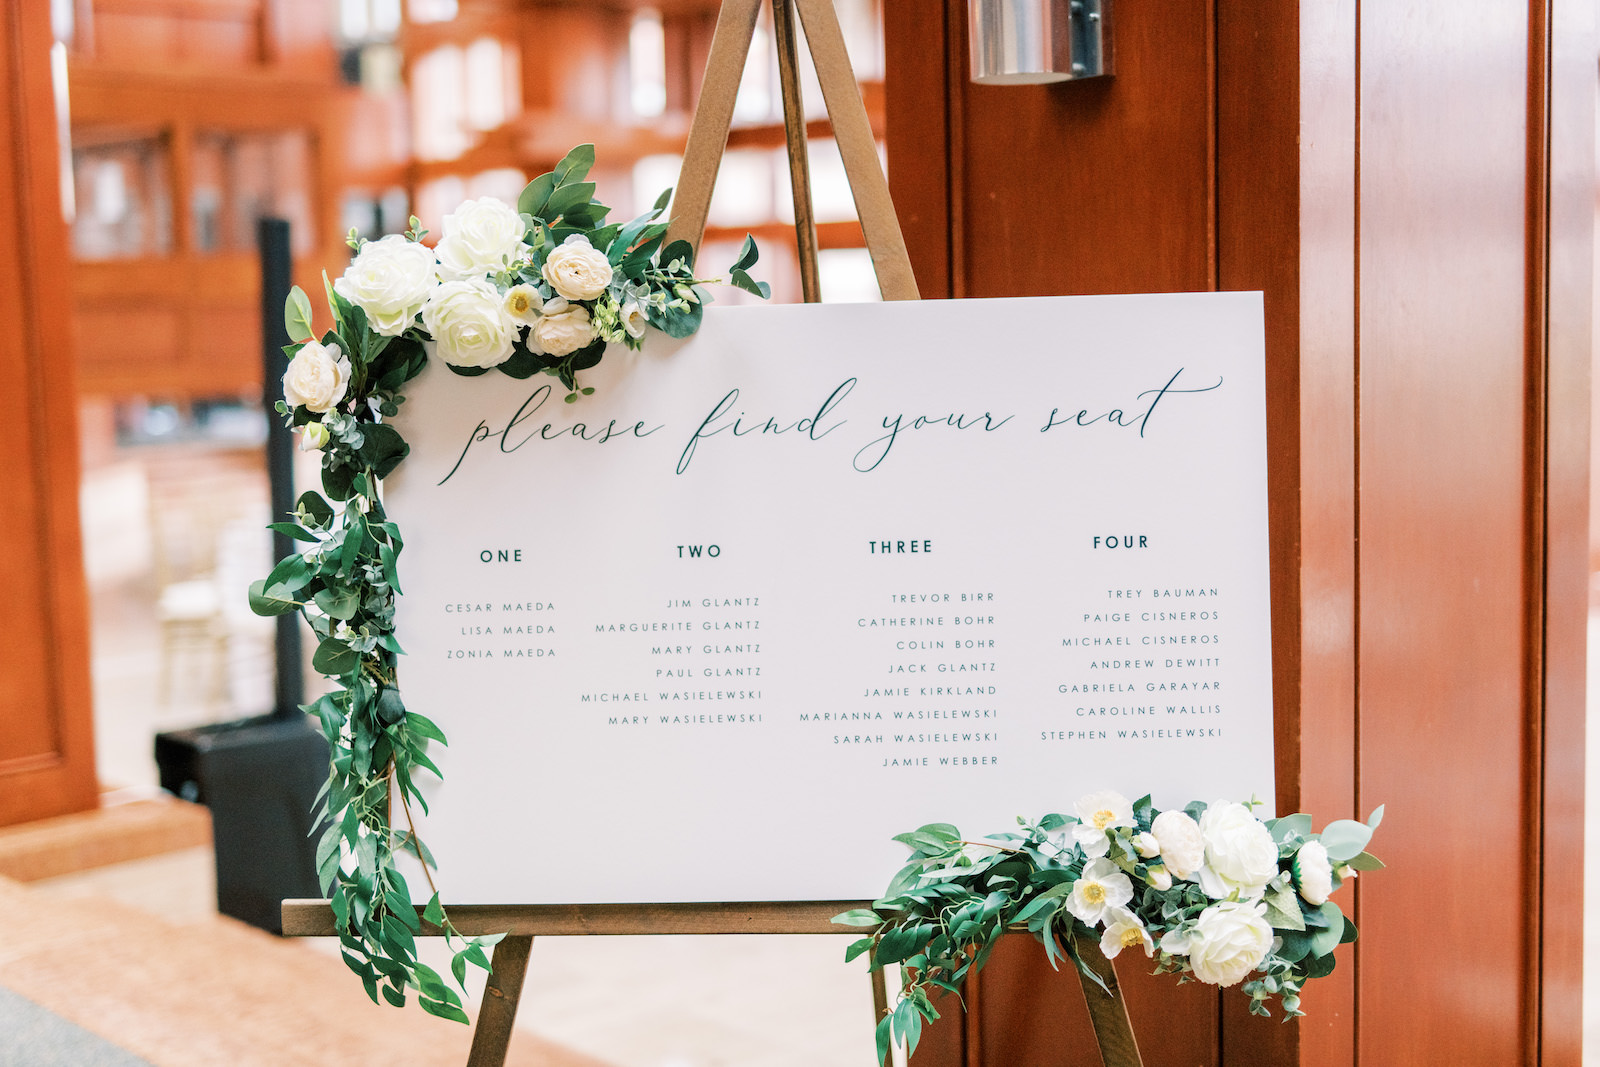 Minimal Wedding Reception Decor, White Seating Chart Sign on Wooden Easel with Eucalyptus Greenery and White Roses Garland | Tampa Bay Wedding Photographer Kera Photography